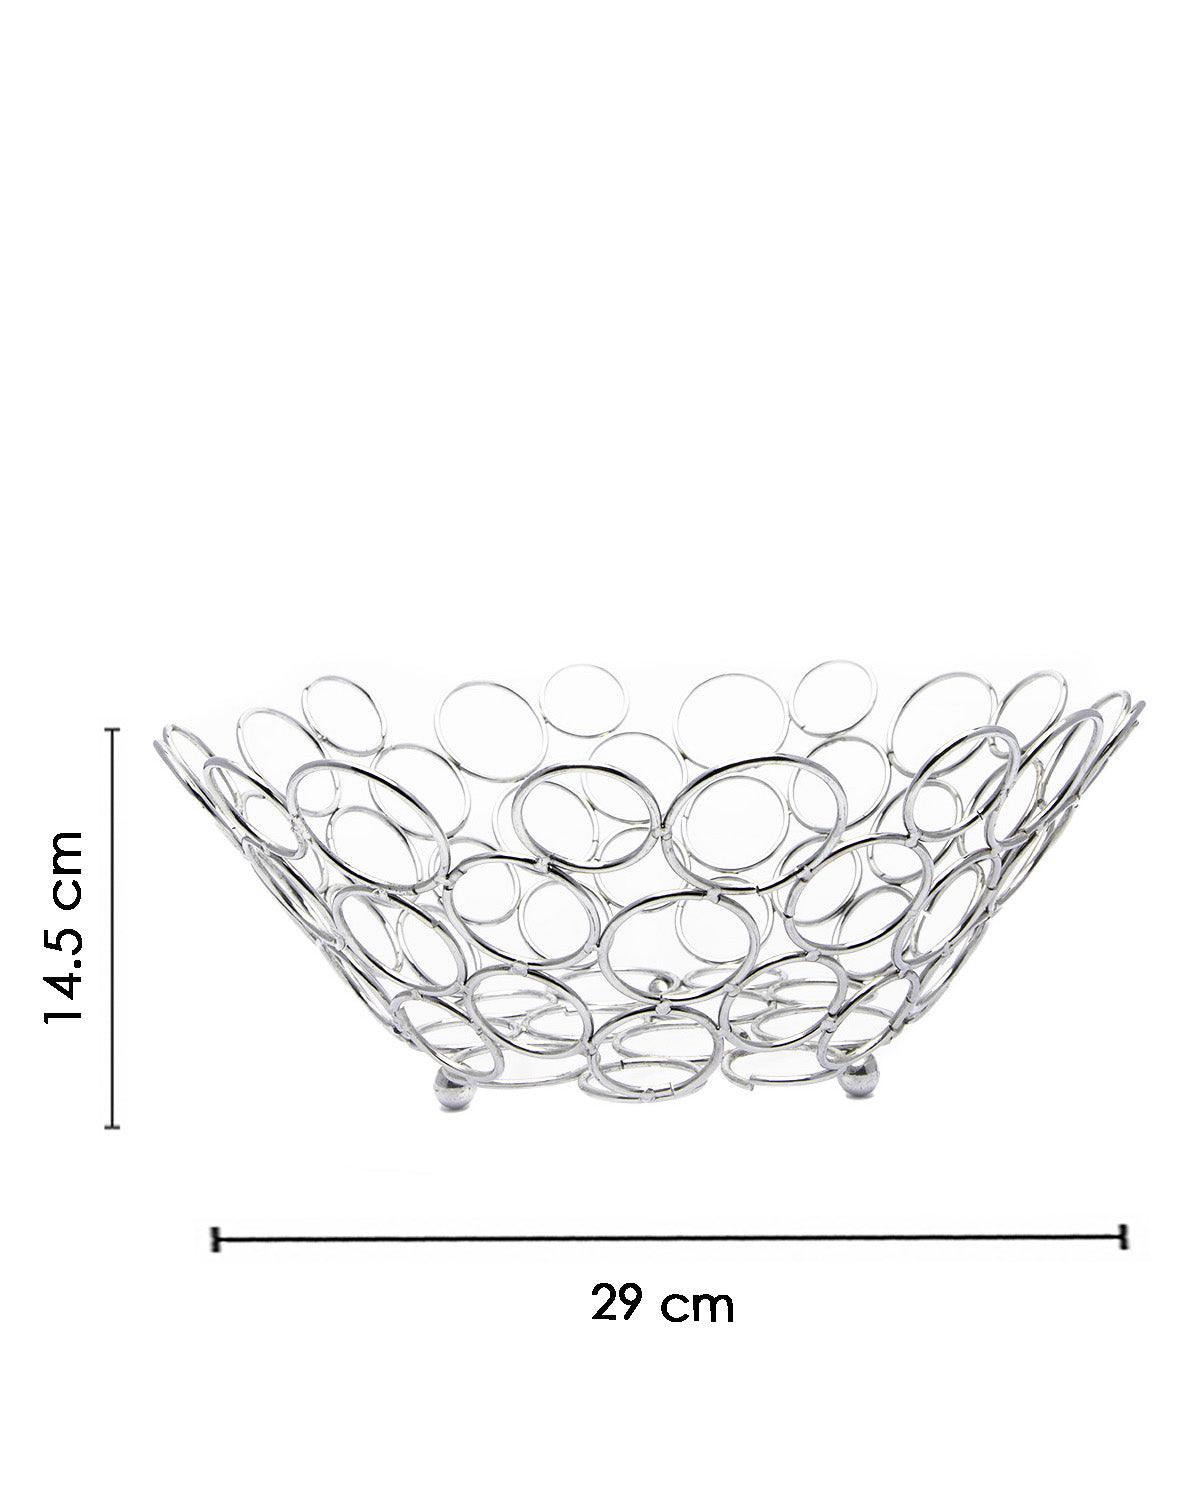 Metal Wire Countertop Fruit Basket, Fruit Holder Stand, For Kitchen, Silver, Iron - MARKET 99